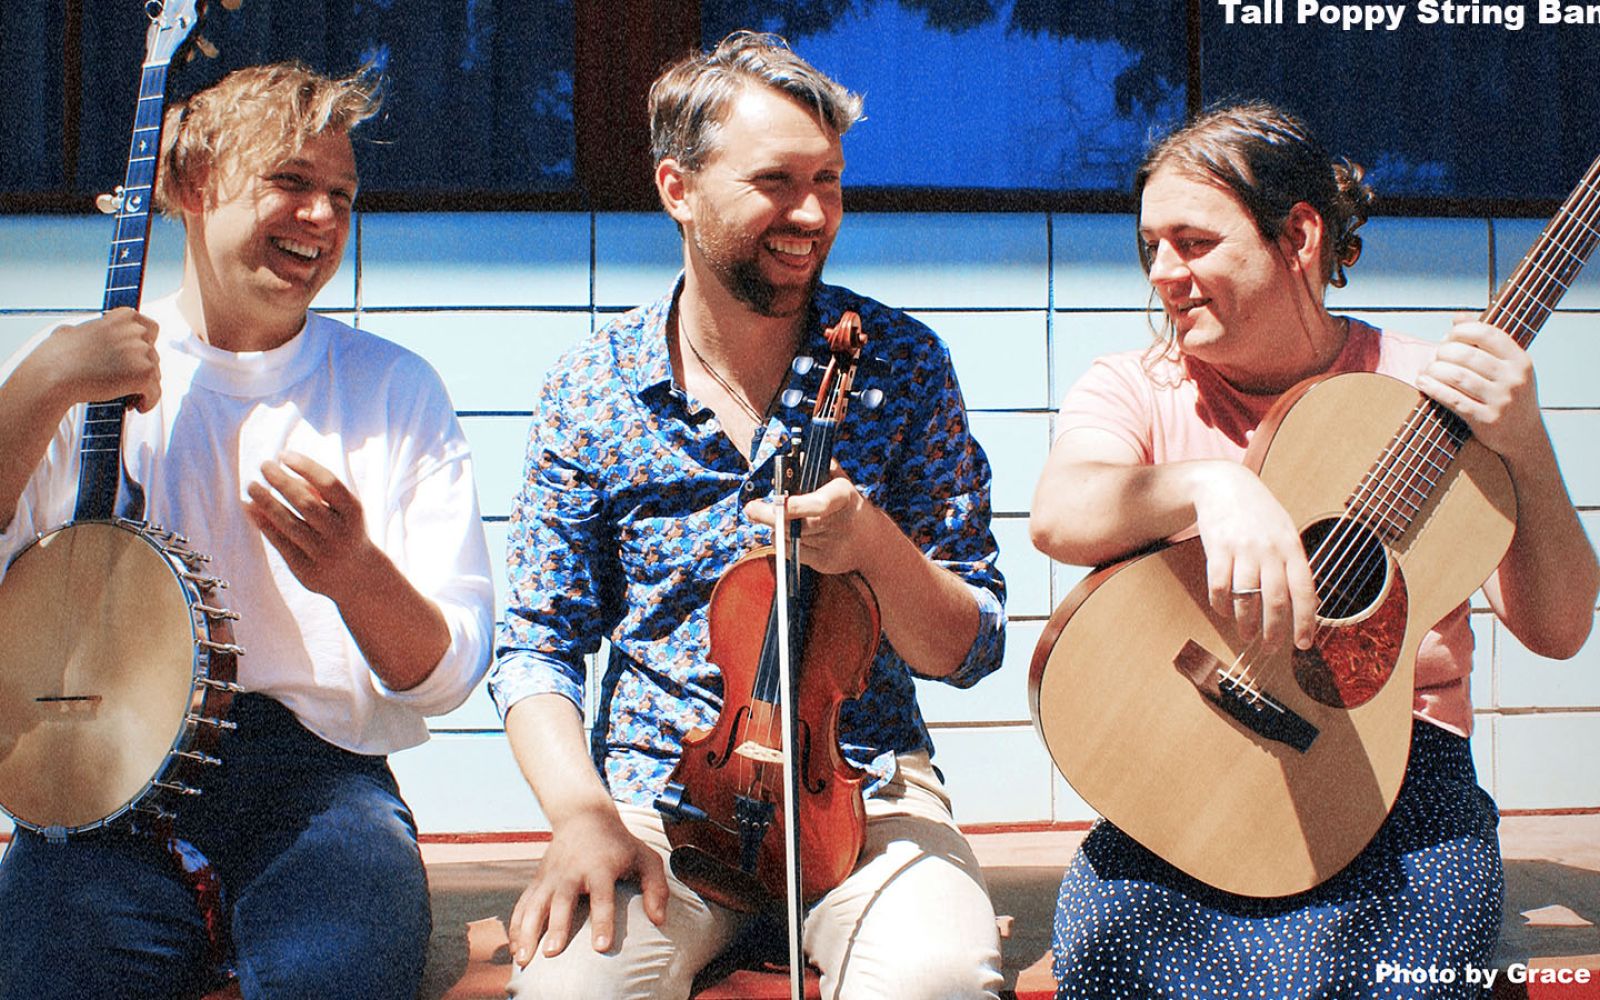 Tall Poppy String Band will be among the acts performing at April in The Garden.